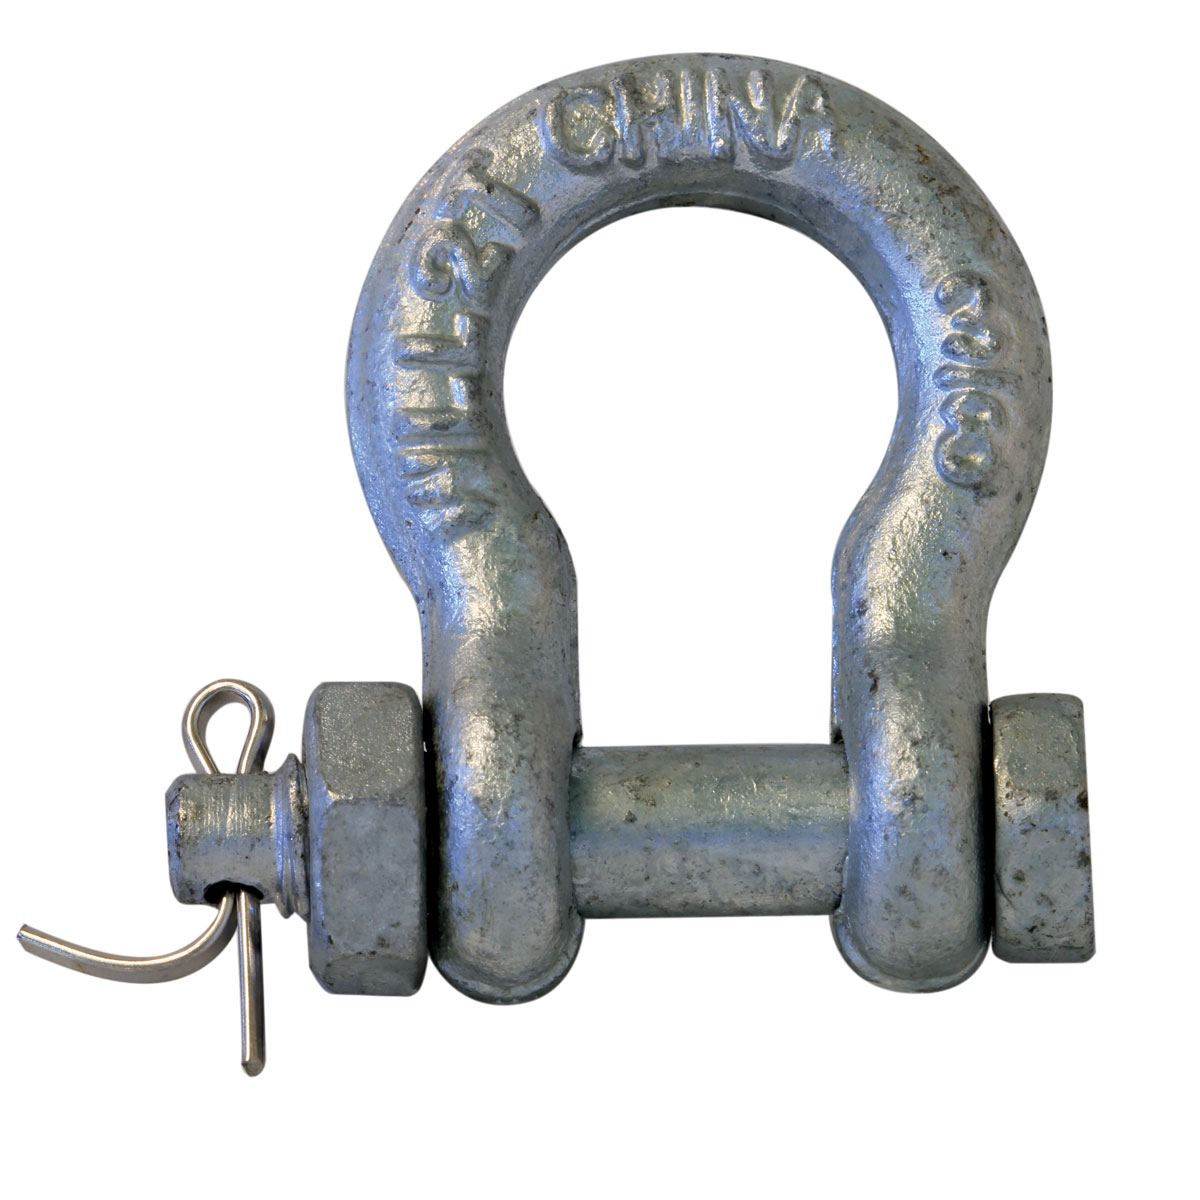 Safety Shackles with bolt, nut and cotter pin